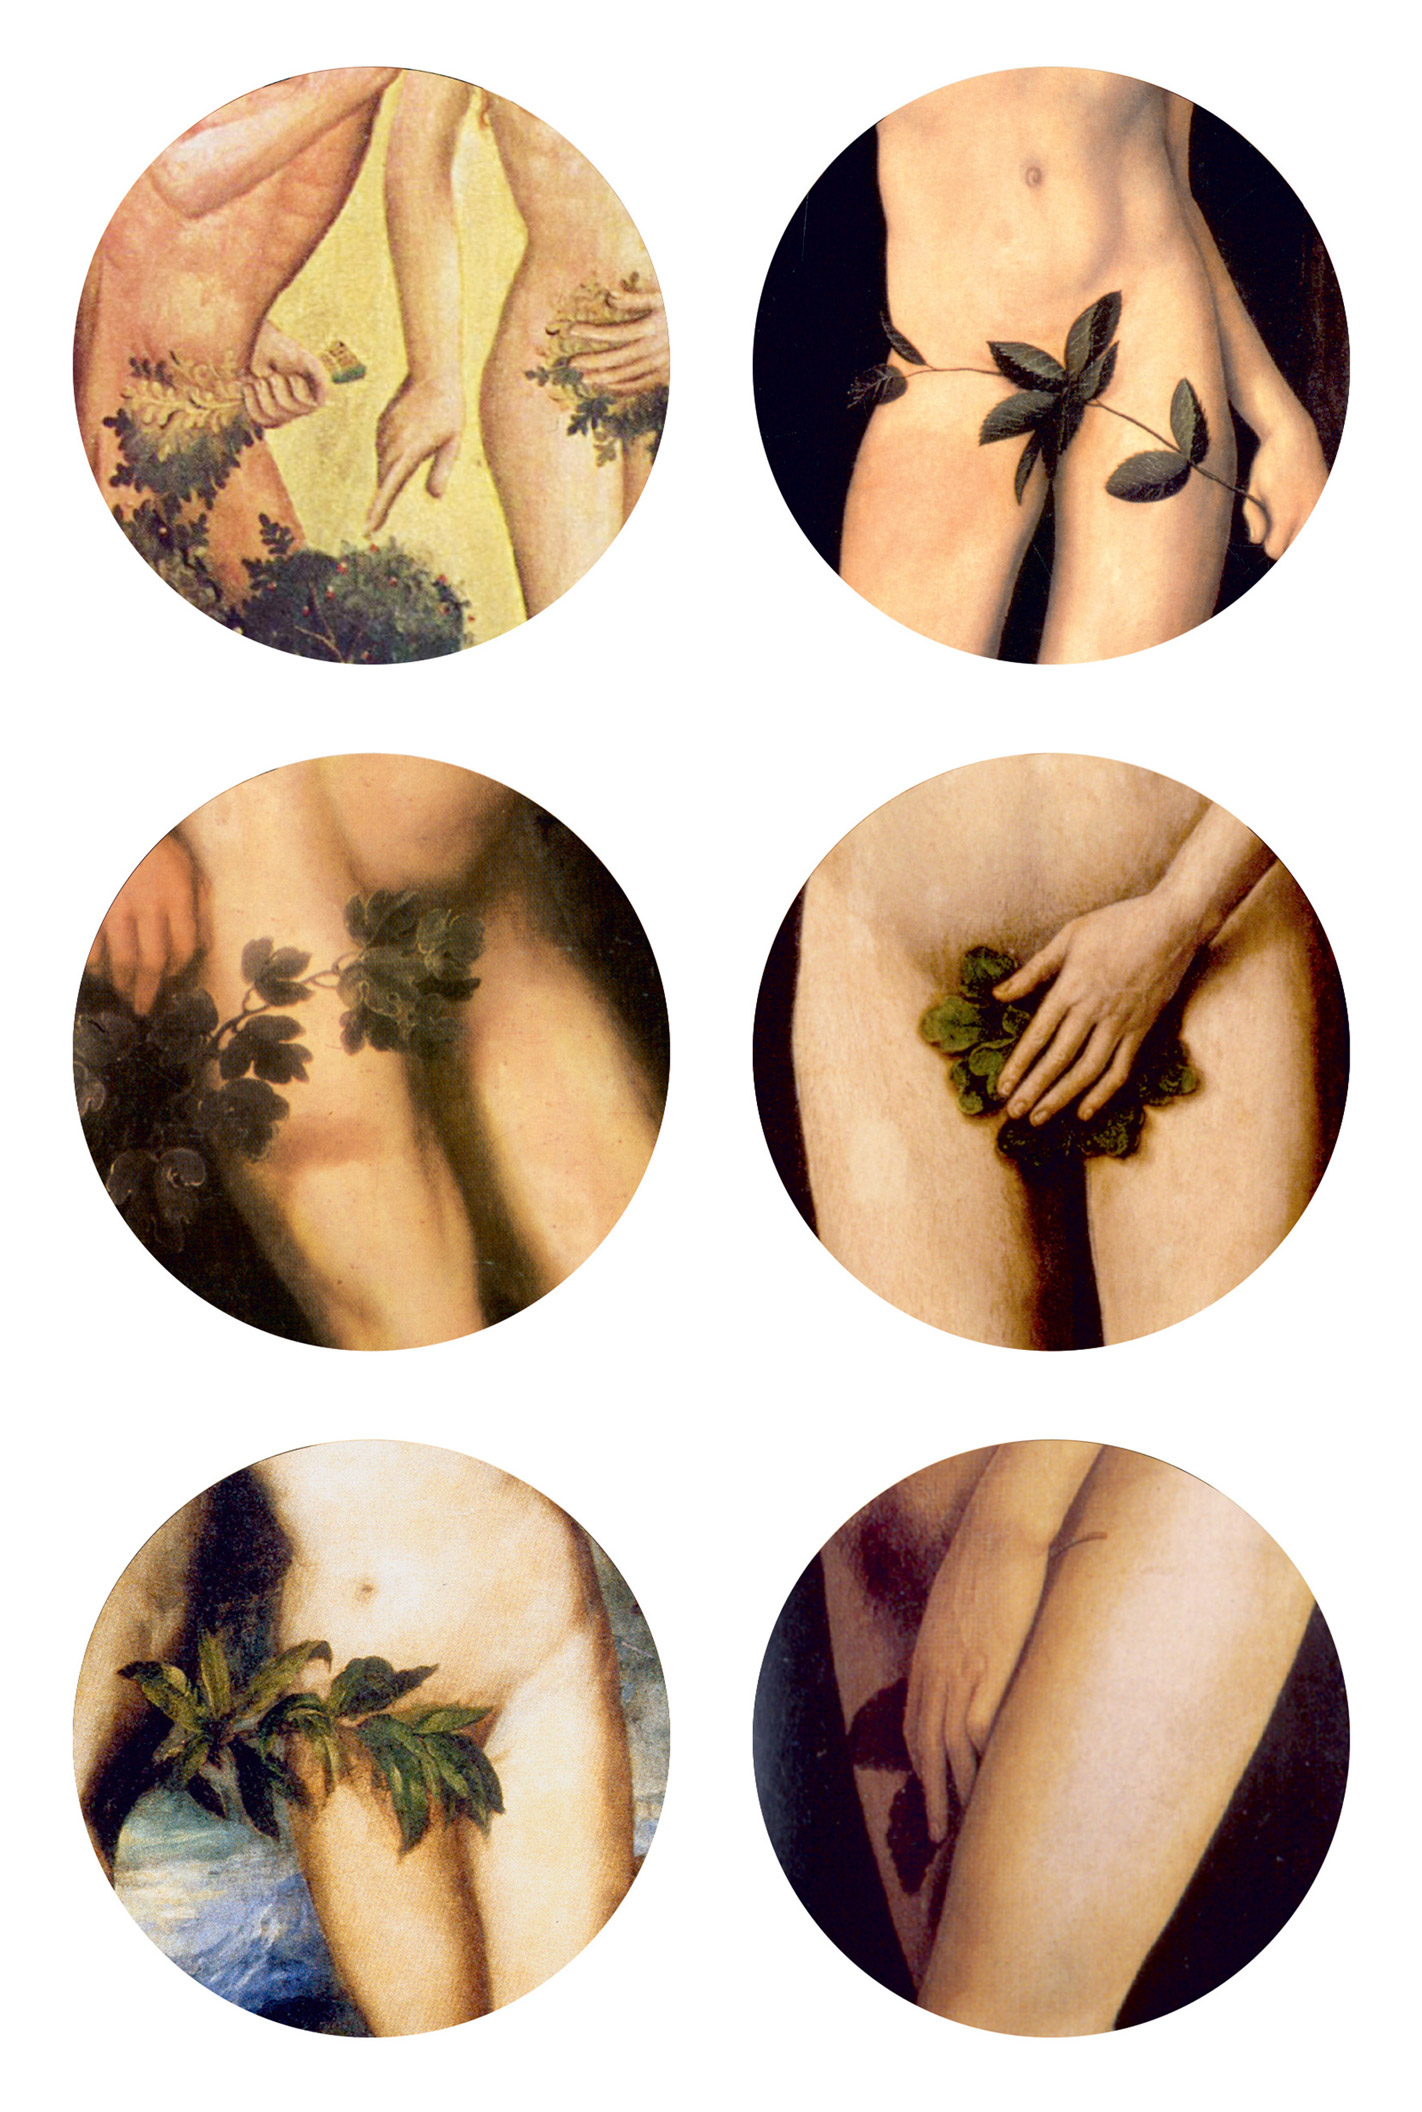 Six close-up paintings of crotches covered by leaves. The paintings include “The Grabow Altarpiece,” circa 1383 by Meister Bertram von Minden; “Adam and Eve,” circa 1599 by Peter Paul Rubens; “Adam and Eve,” circa 1550 by Titian; “Adam and Eve,” circa 1528 by Lucas Cranach the Elder; “Adam and Eve,” circa 1485 by Hans Memling; and finally, “The Ghent Altarpiece,” circa 1432 by Hubert and Jan van Eyck. 